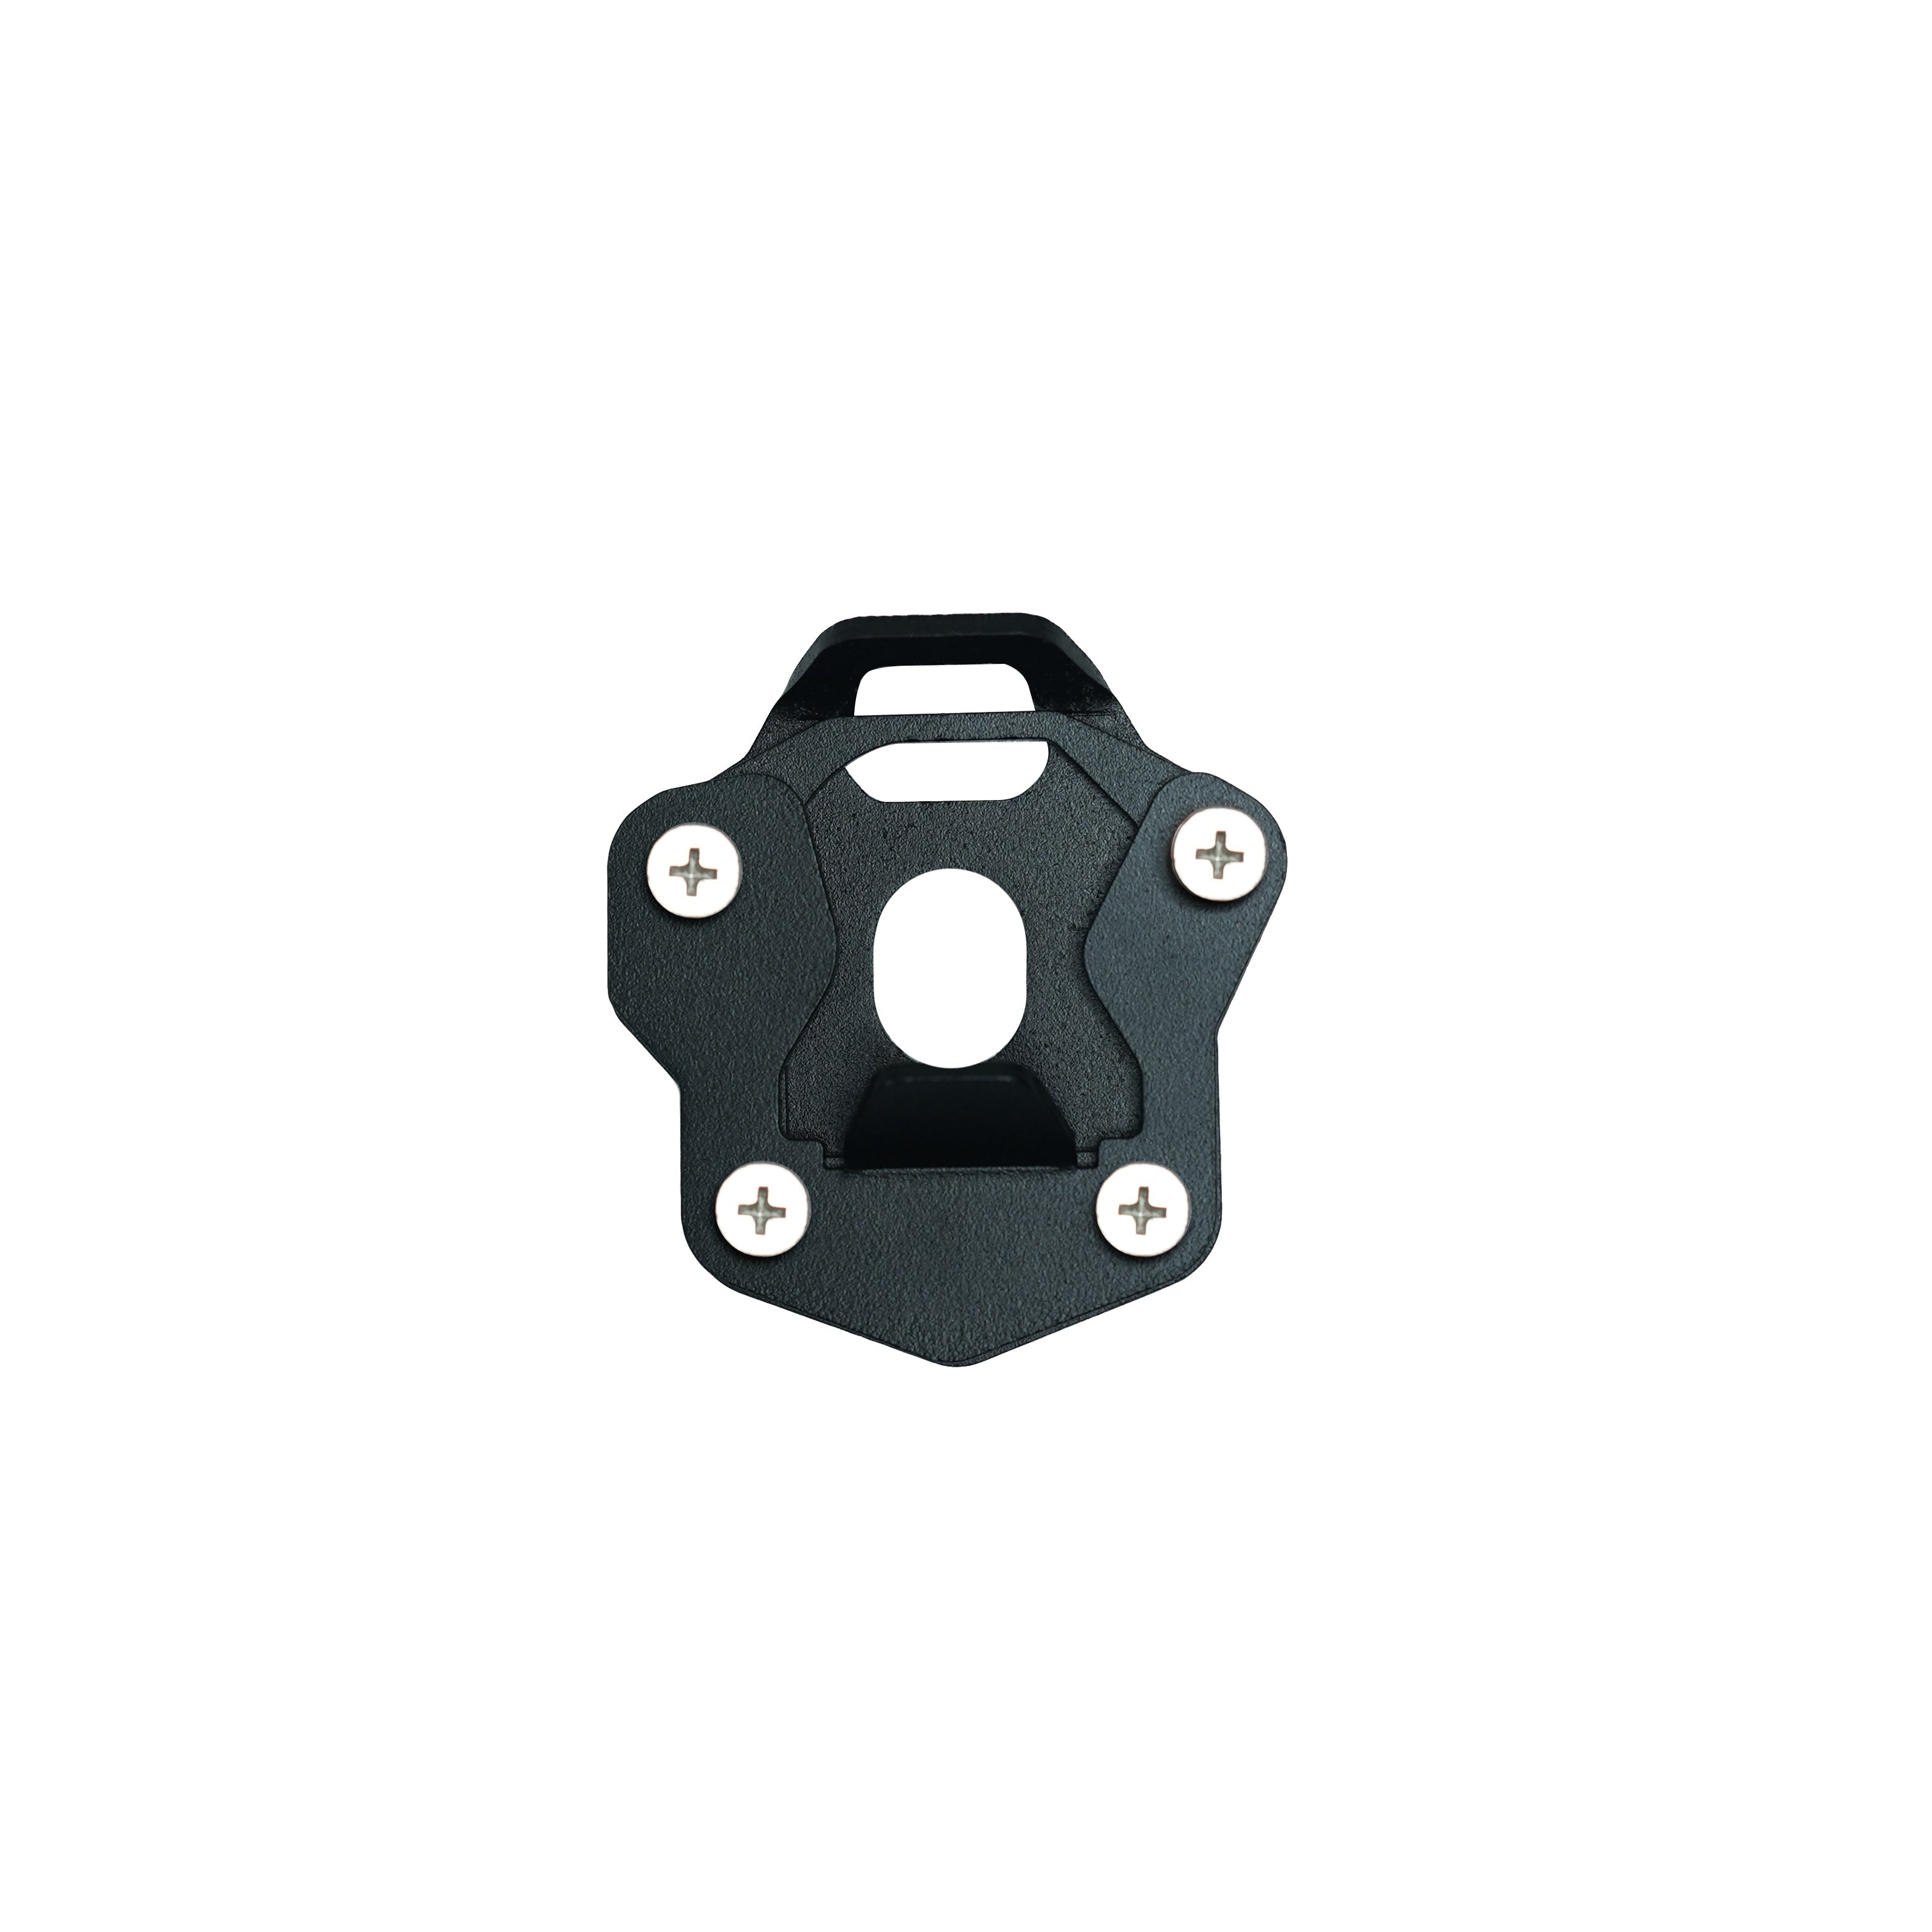 HIMALAYAN BS4/BS6 SIDE STAND BASE MS | MOTO CRUX